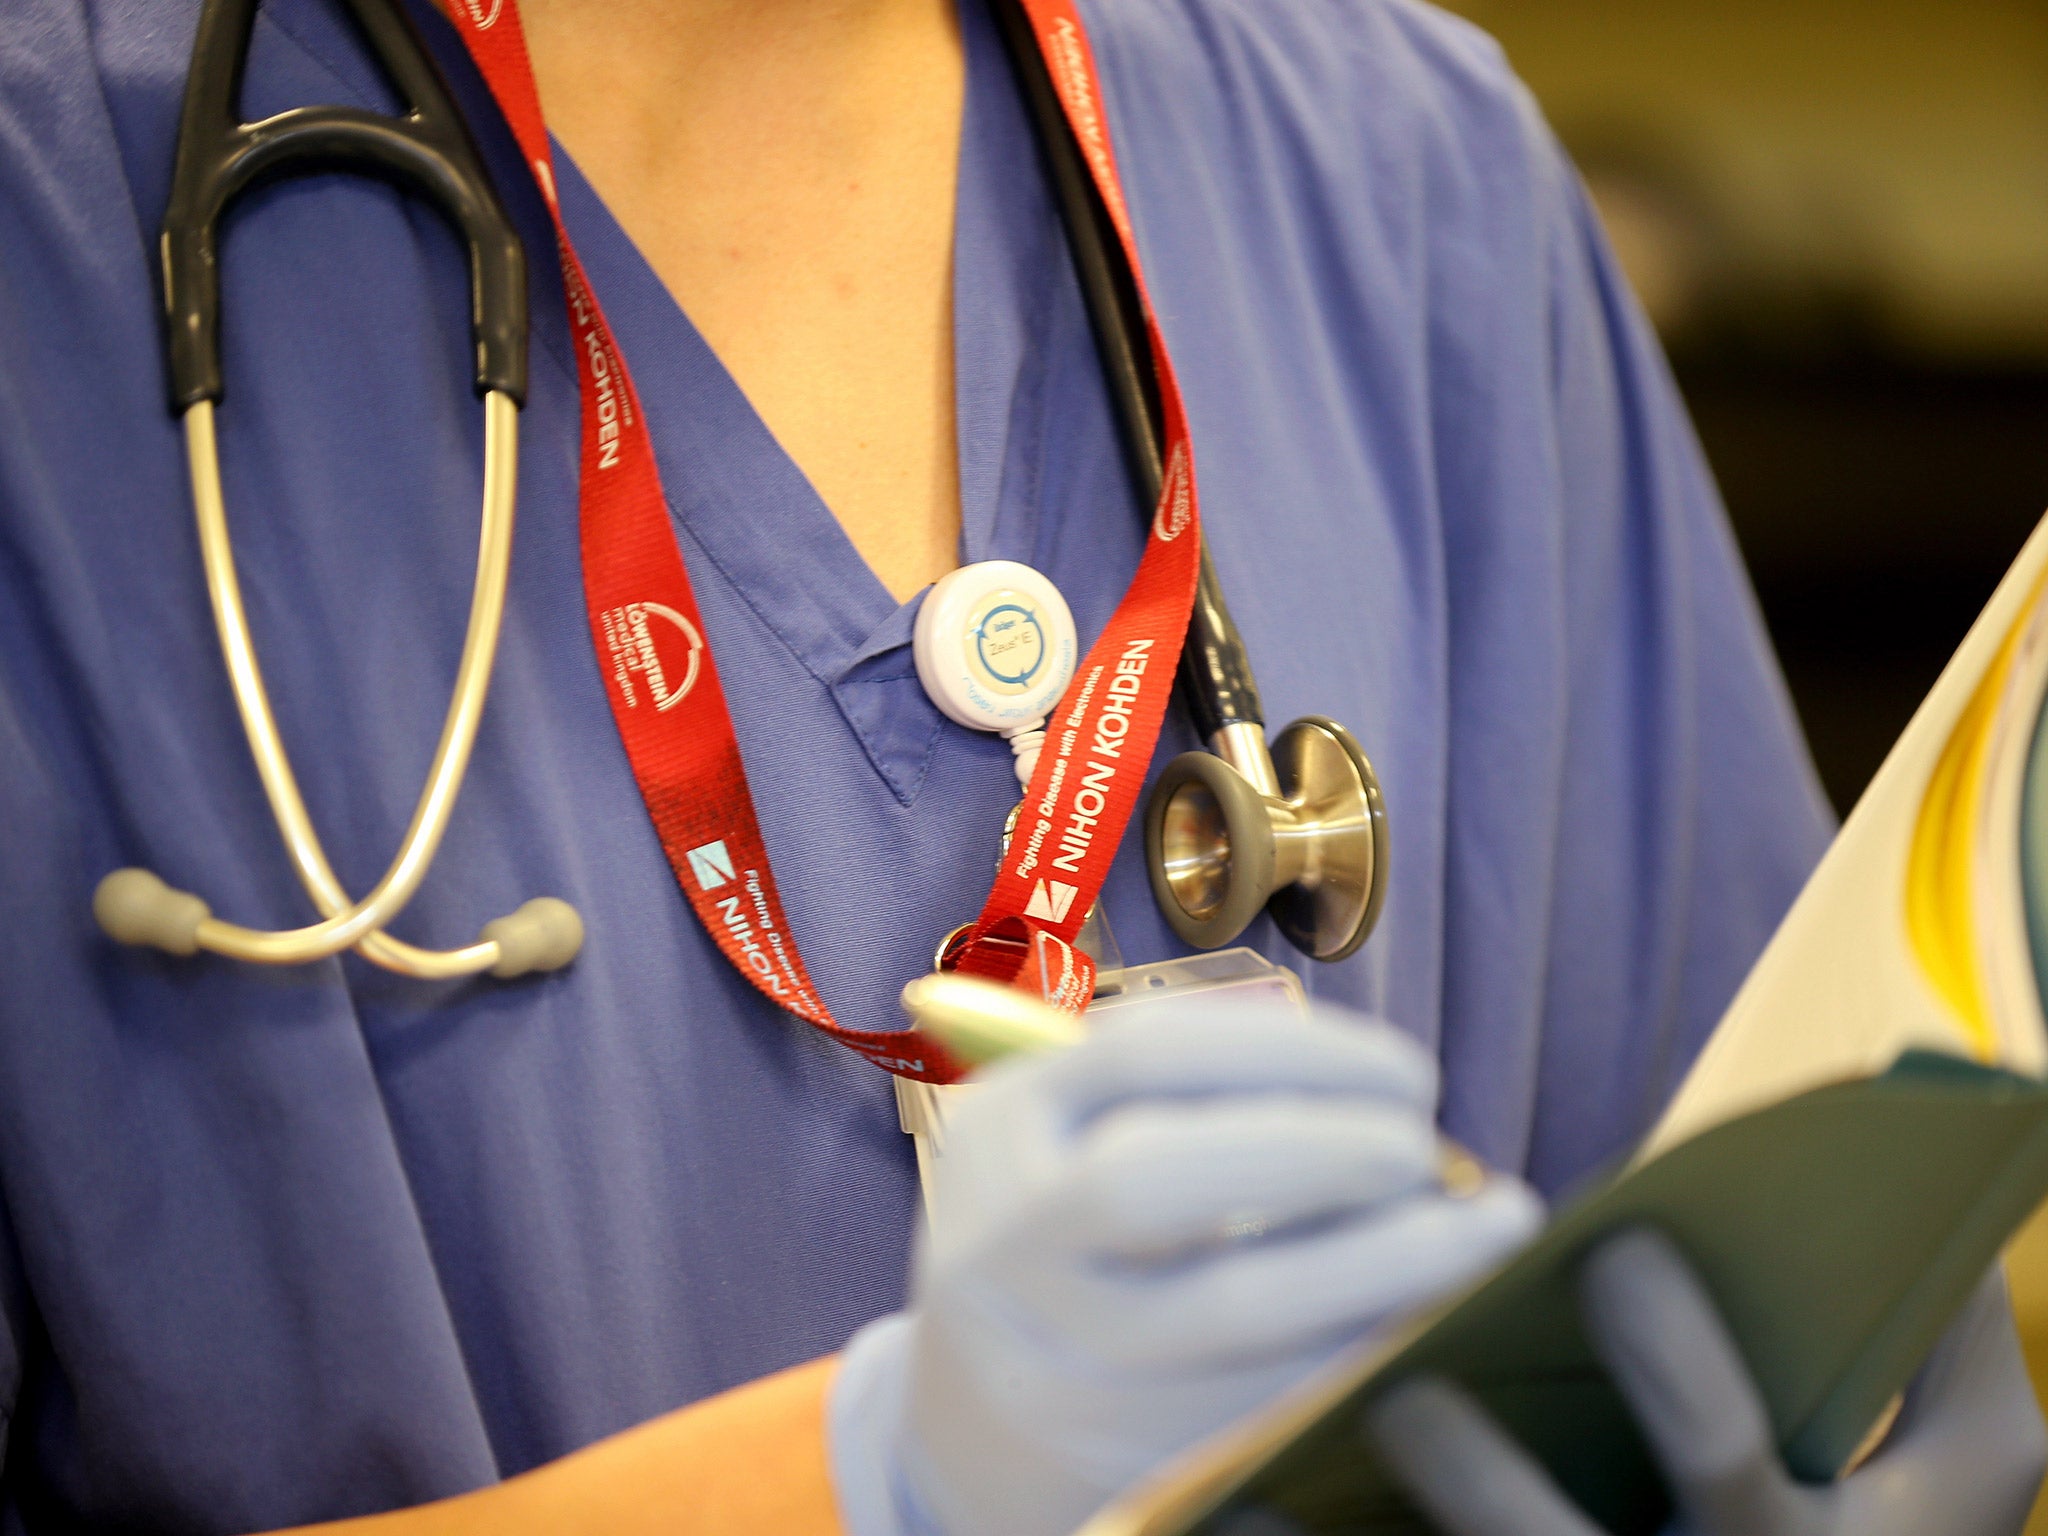 65 per cent of NHS employees are considering quitting